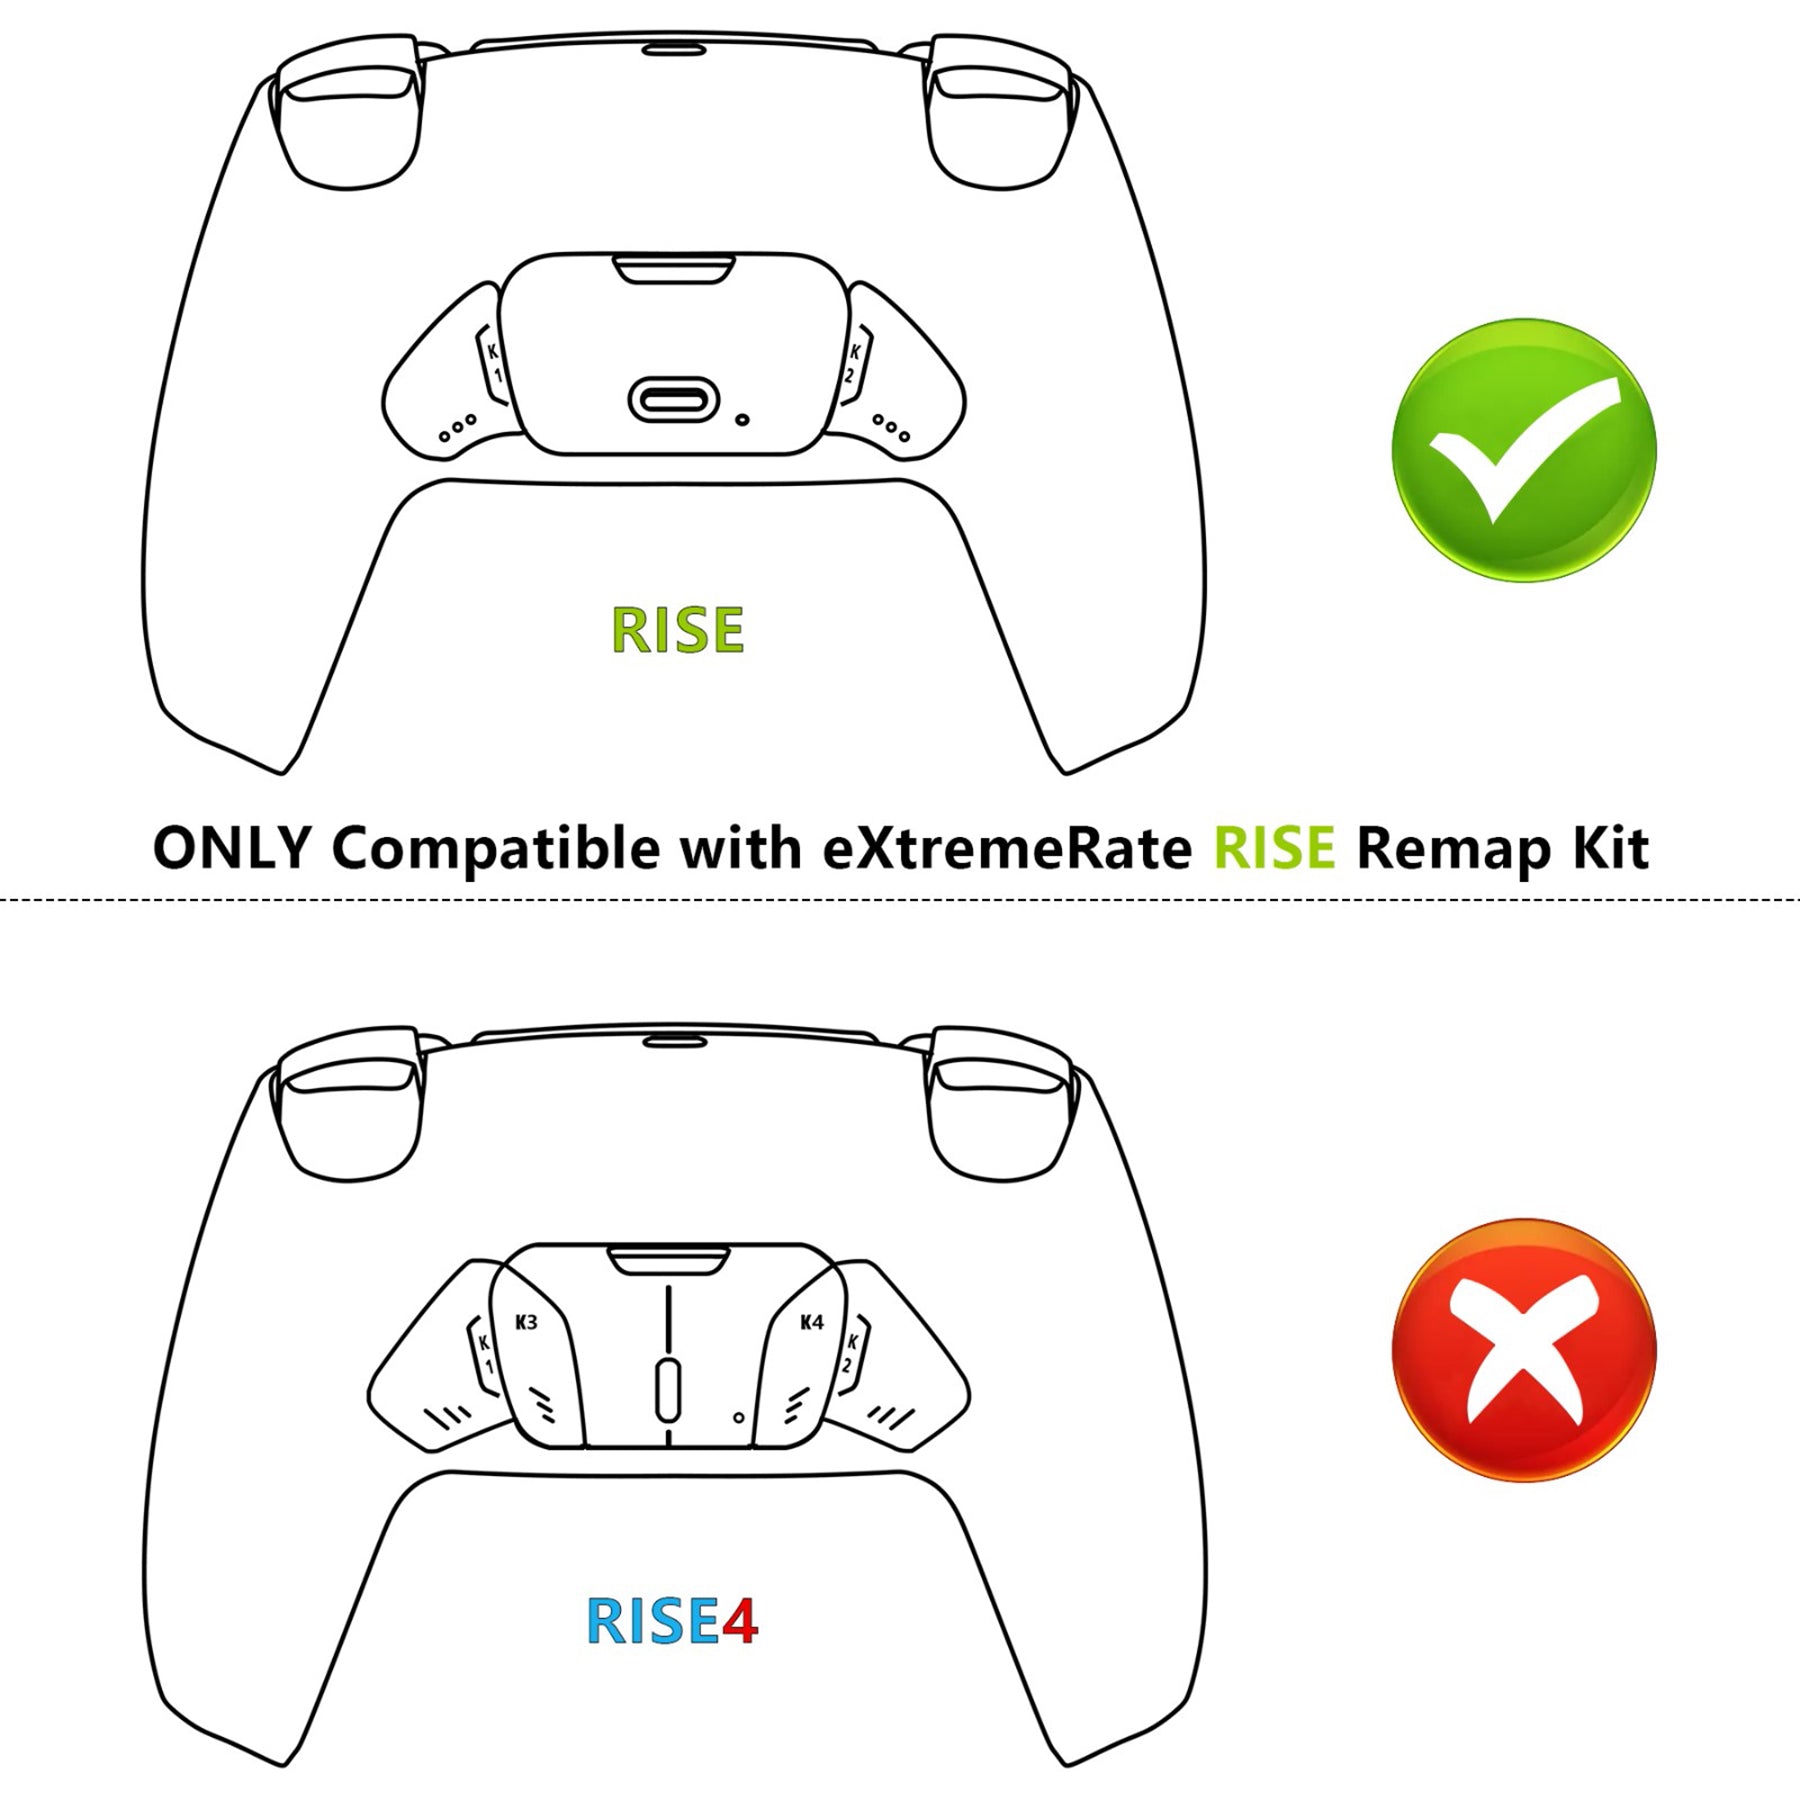 eXtremeRate Replacement Redesigned K1 K2 Back Buttons for eXtremerate RISE Remap Kit, Compatible with PS5 Controller - Starlight Blue eXtremeRate